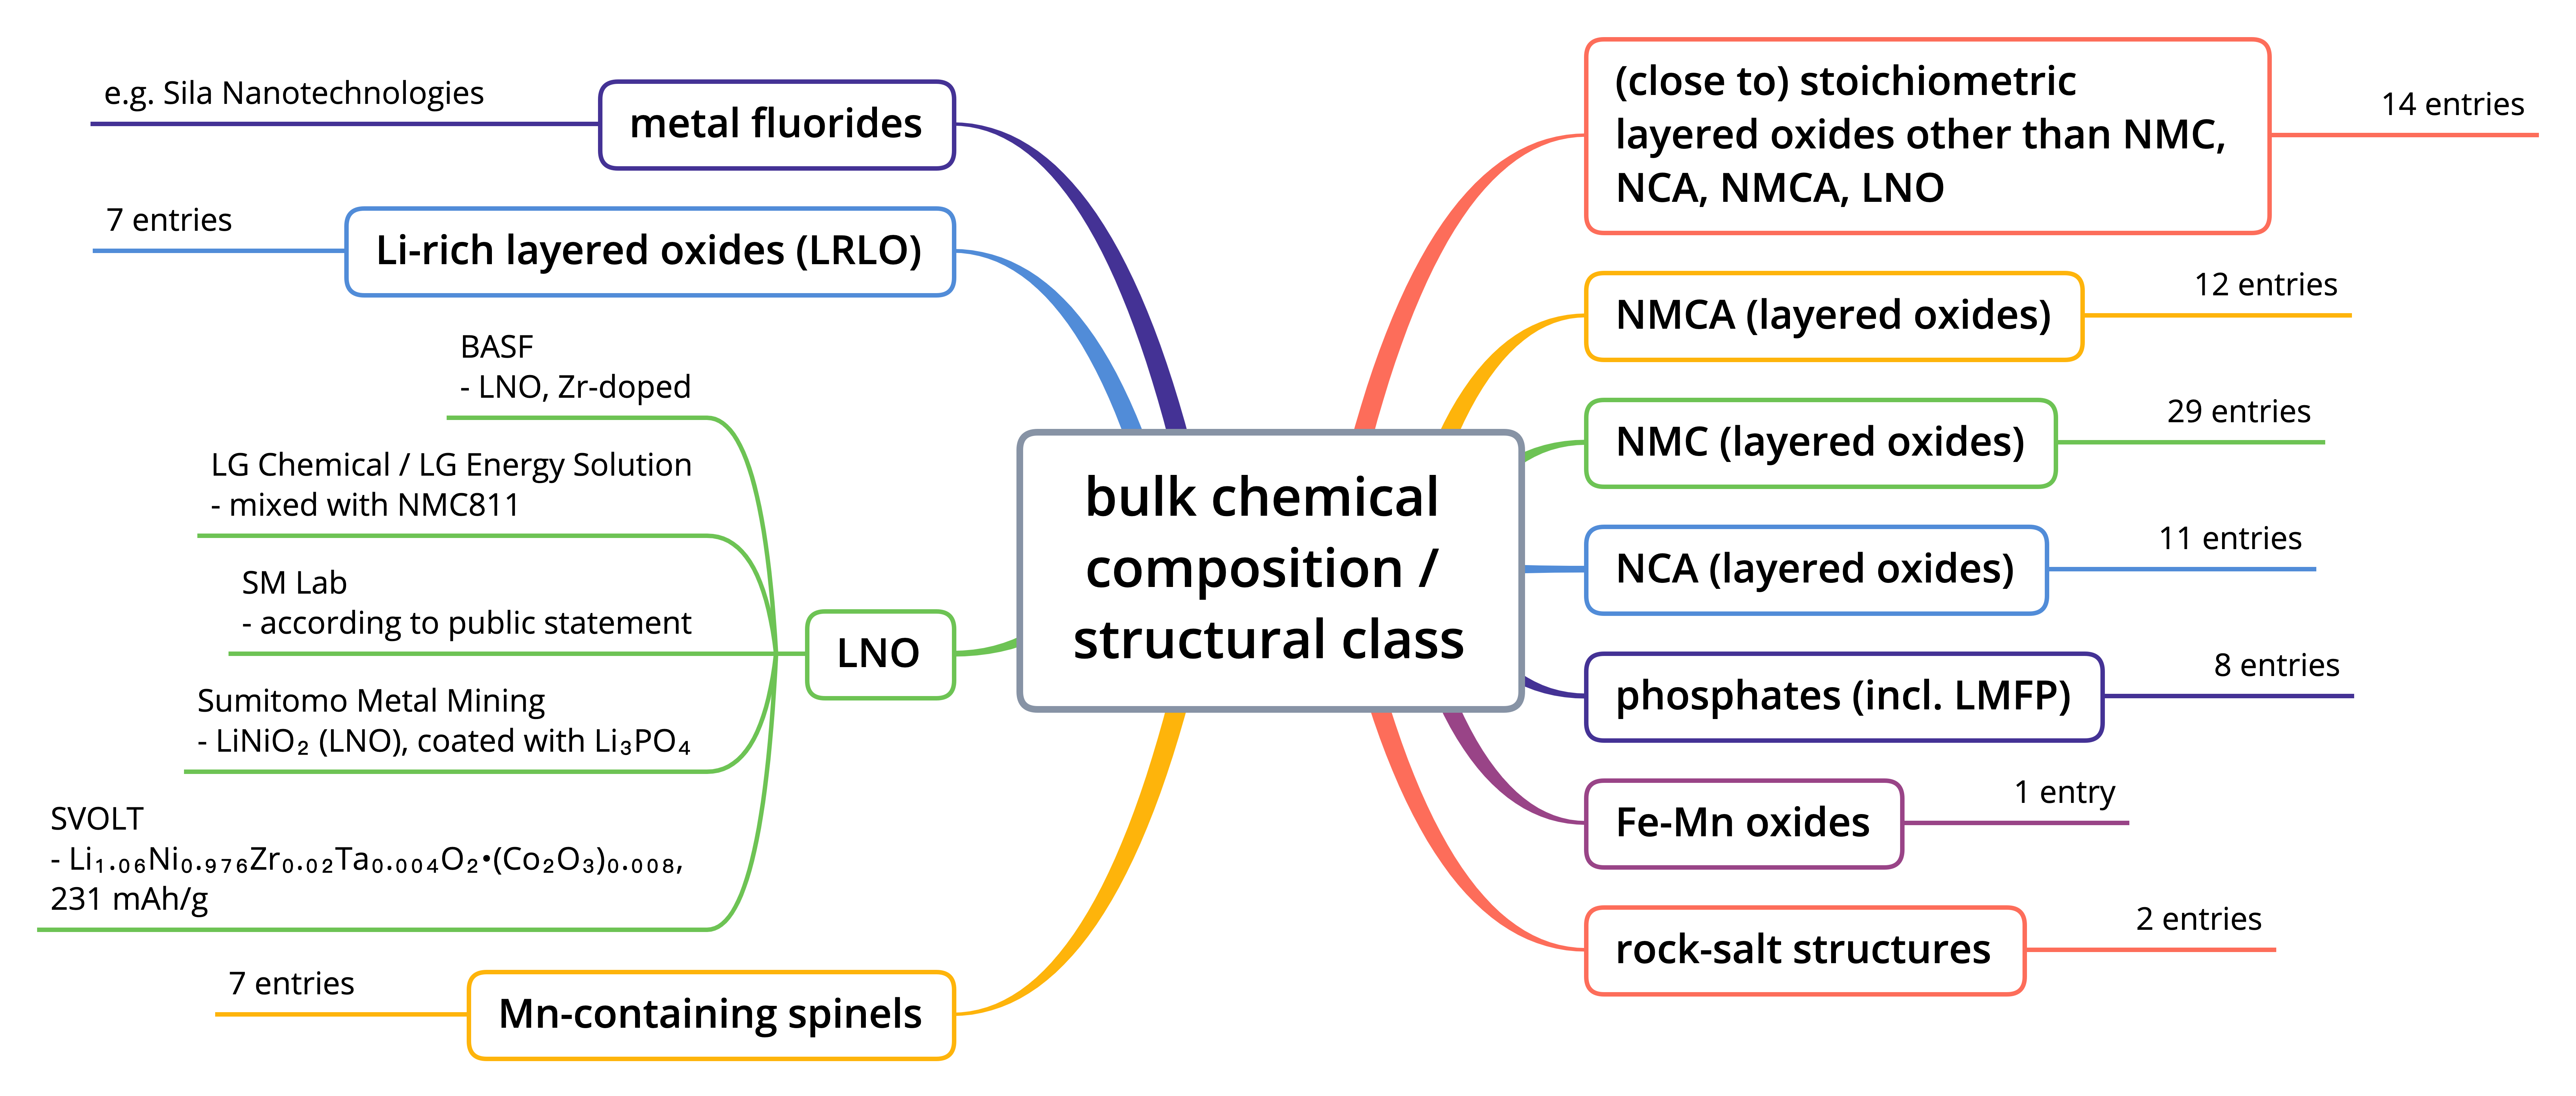 Technology decision tree – bulk chemical composition / structural class of cathode active materials in Li-ion batteries